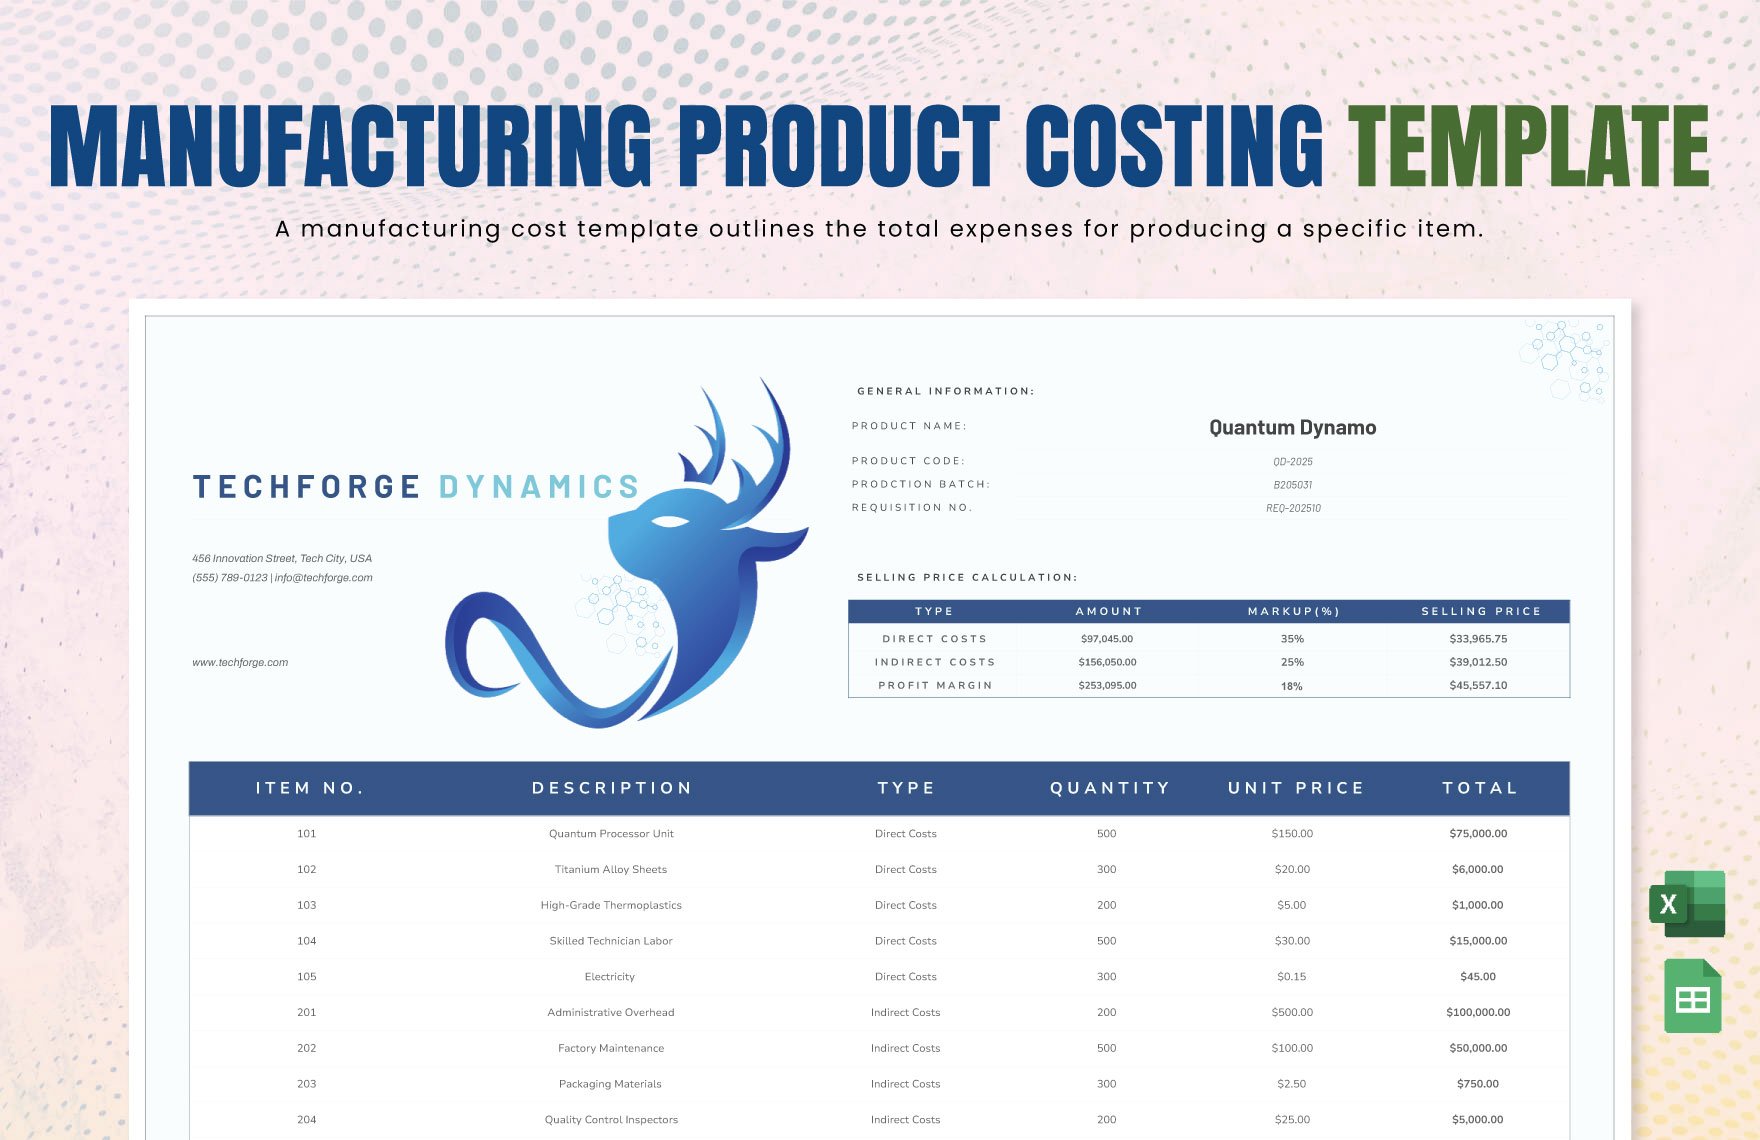 Manufacturing Product Costing Template in Excel, Google Sheets